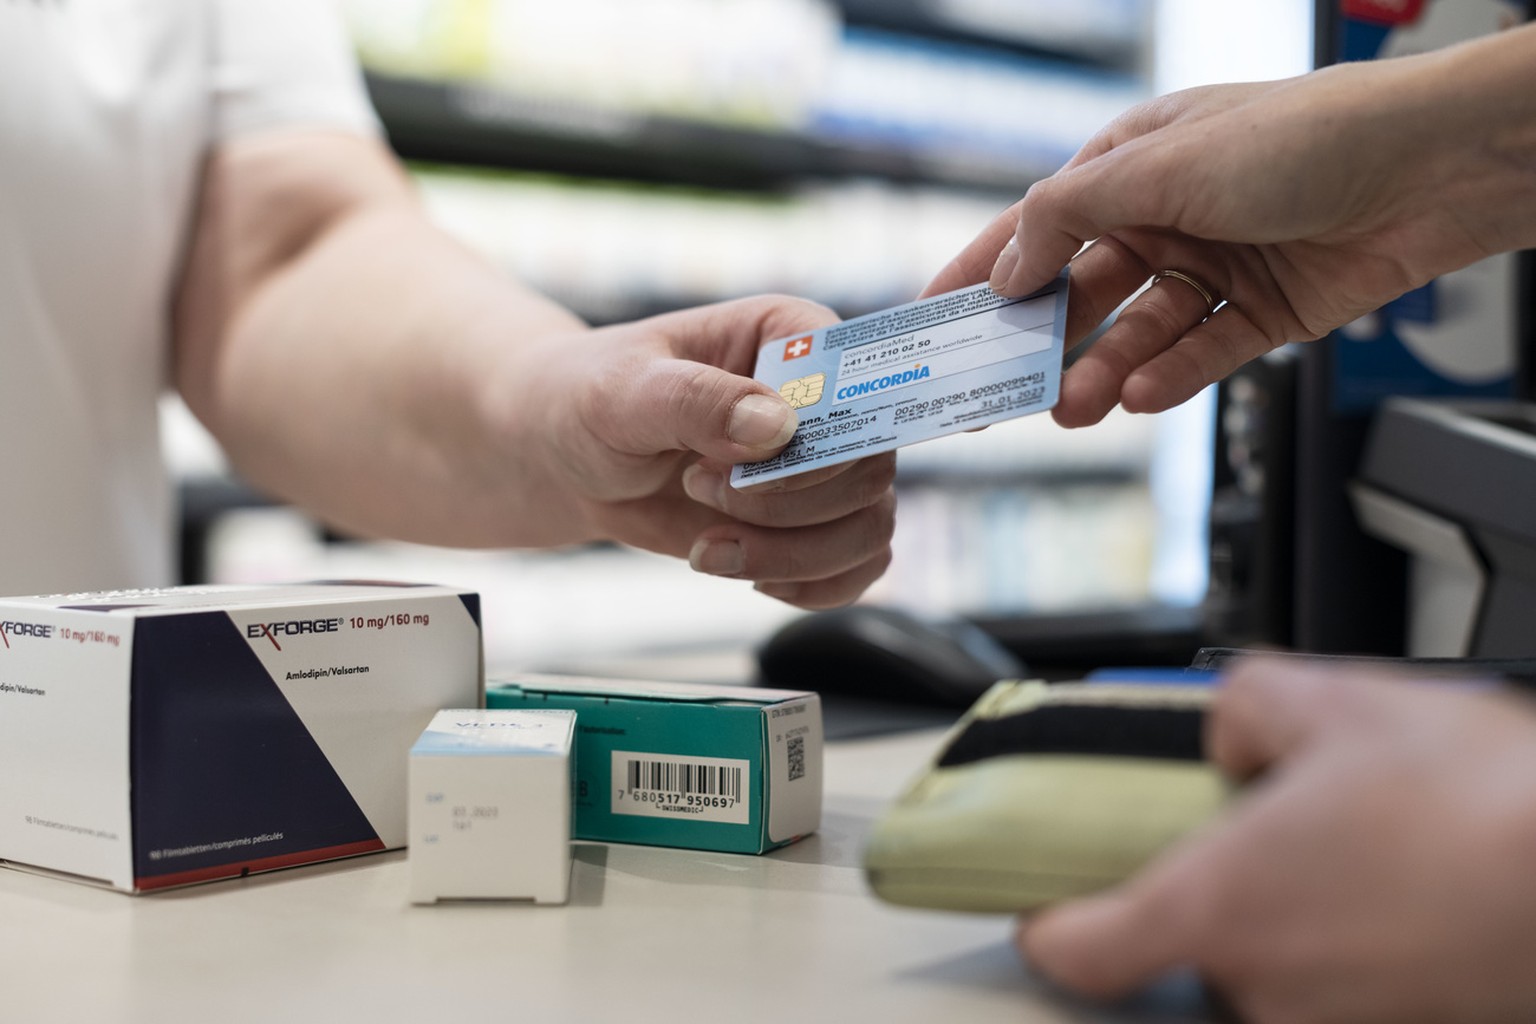 [Symbolic Image / Staged Image] A Concordia Insurances health insurance card is used at the checkout of a pharmacy in Zurich, Switzerland, on October 28, 2019. (KEYSTONE/Christian Beutler)

[Symbolbil ...